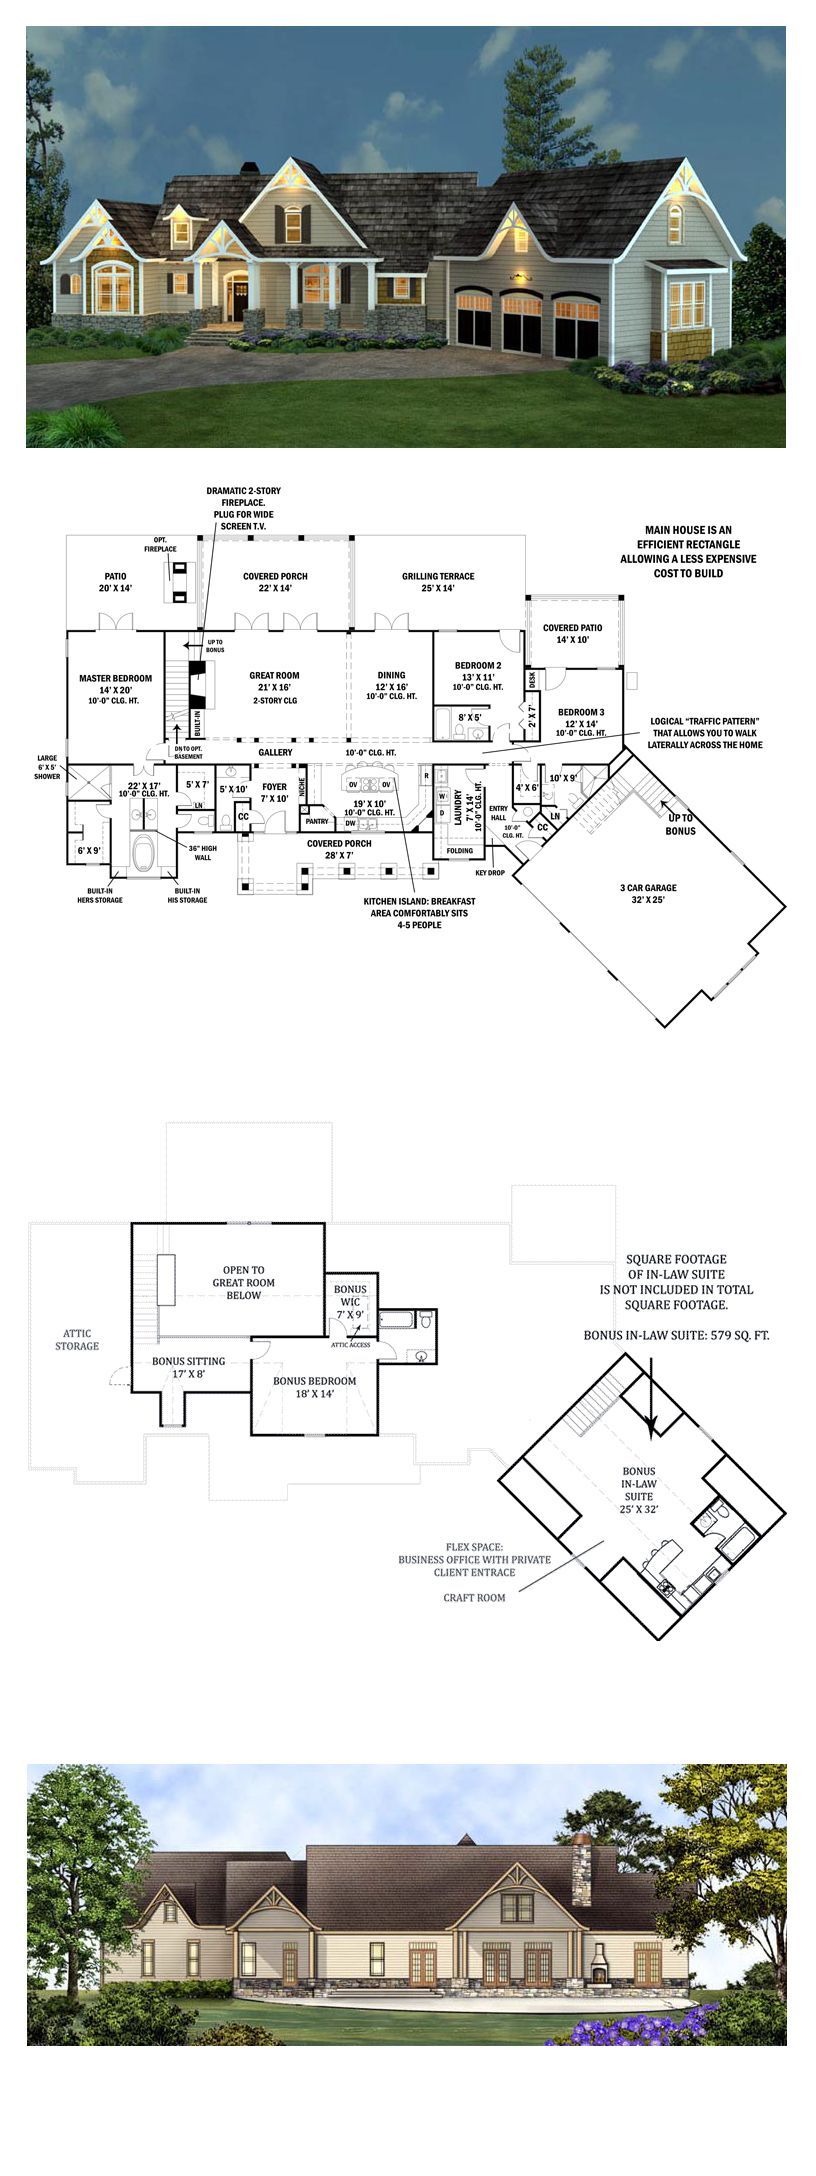 Ranch House Plan 98267 | Total Living Area: 2498 sq. ft. Just need an office added somewhere too